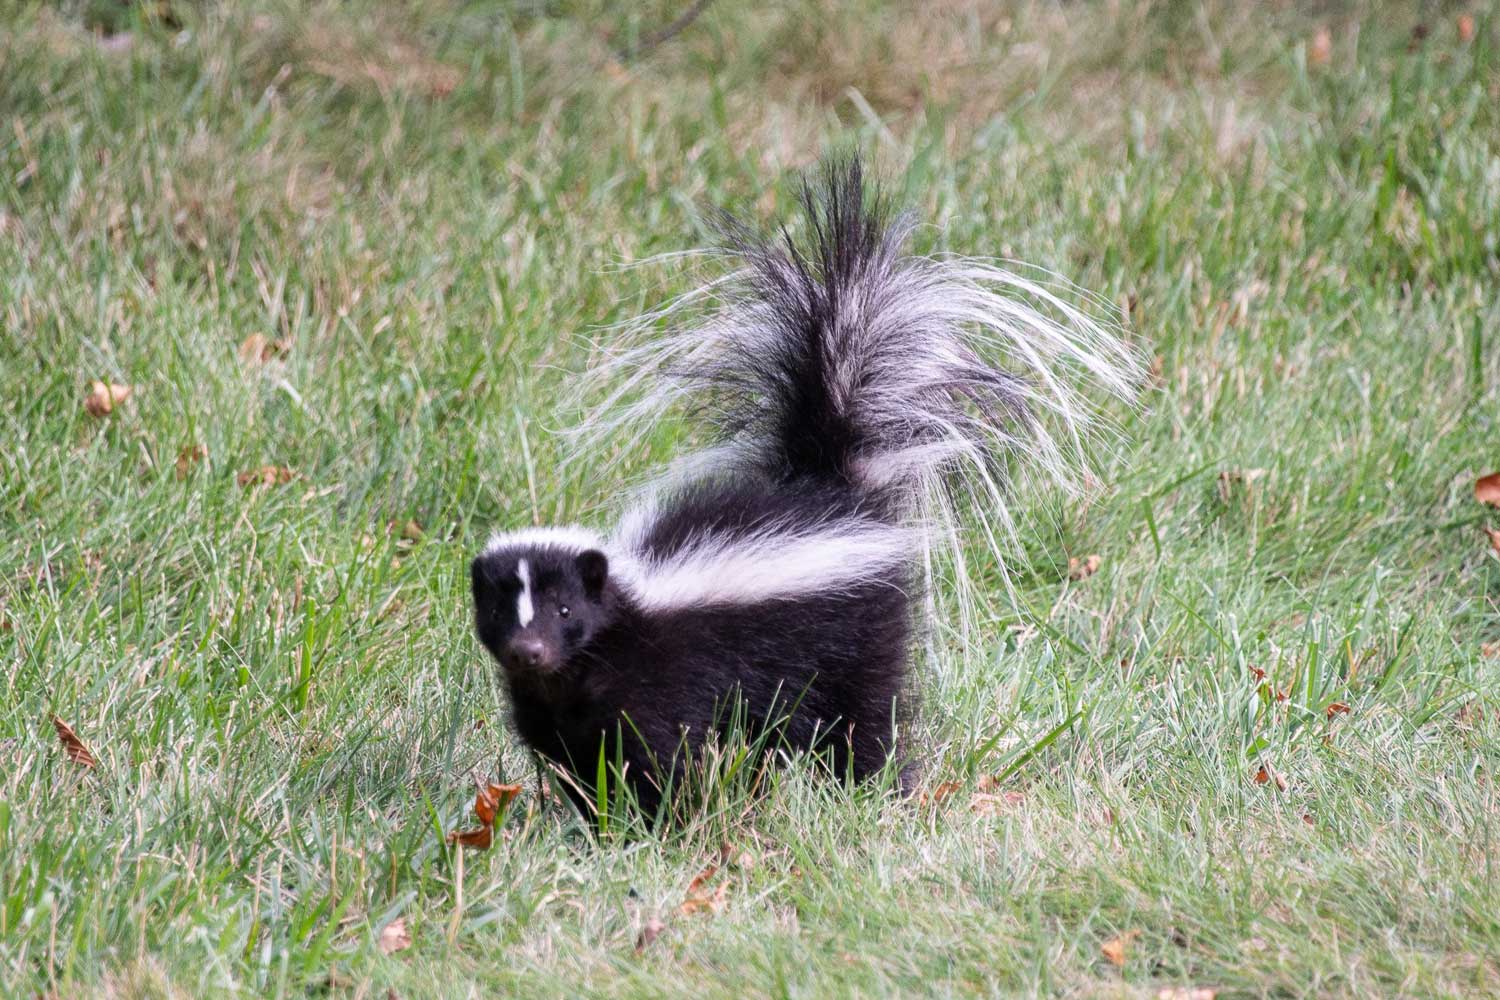 A skunk standing in the grass.